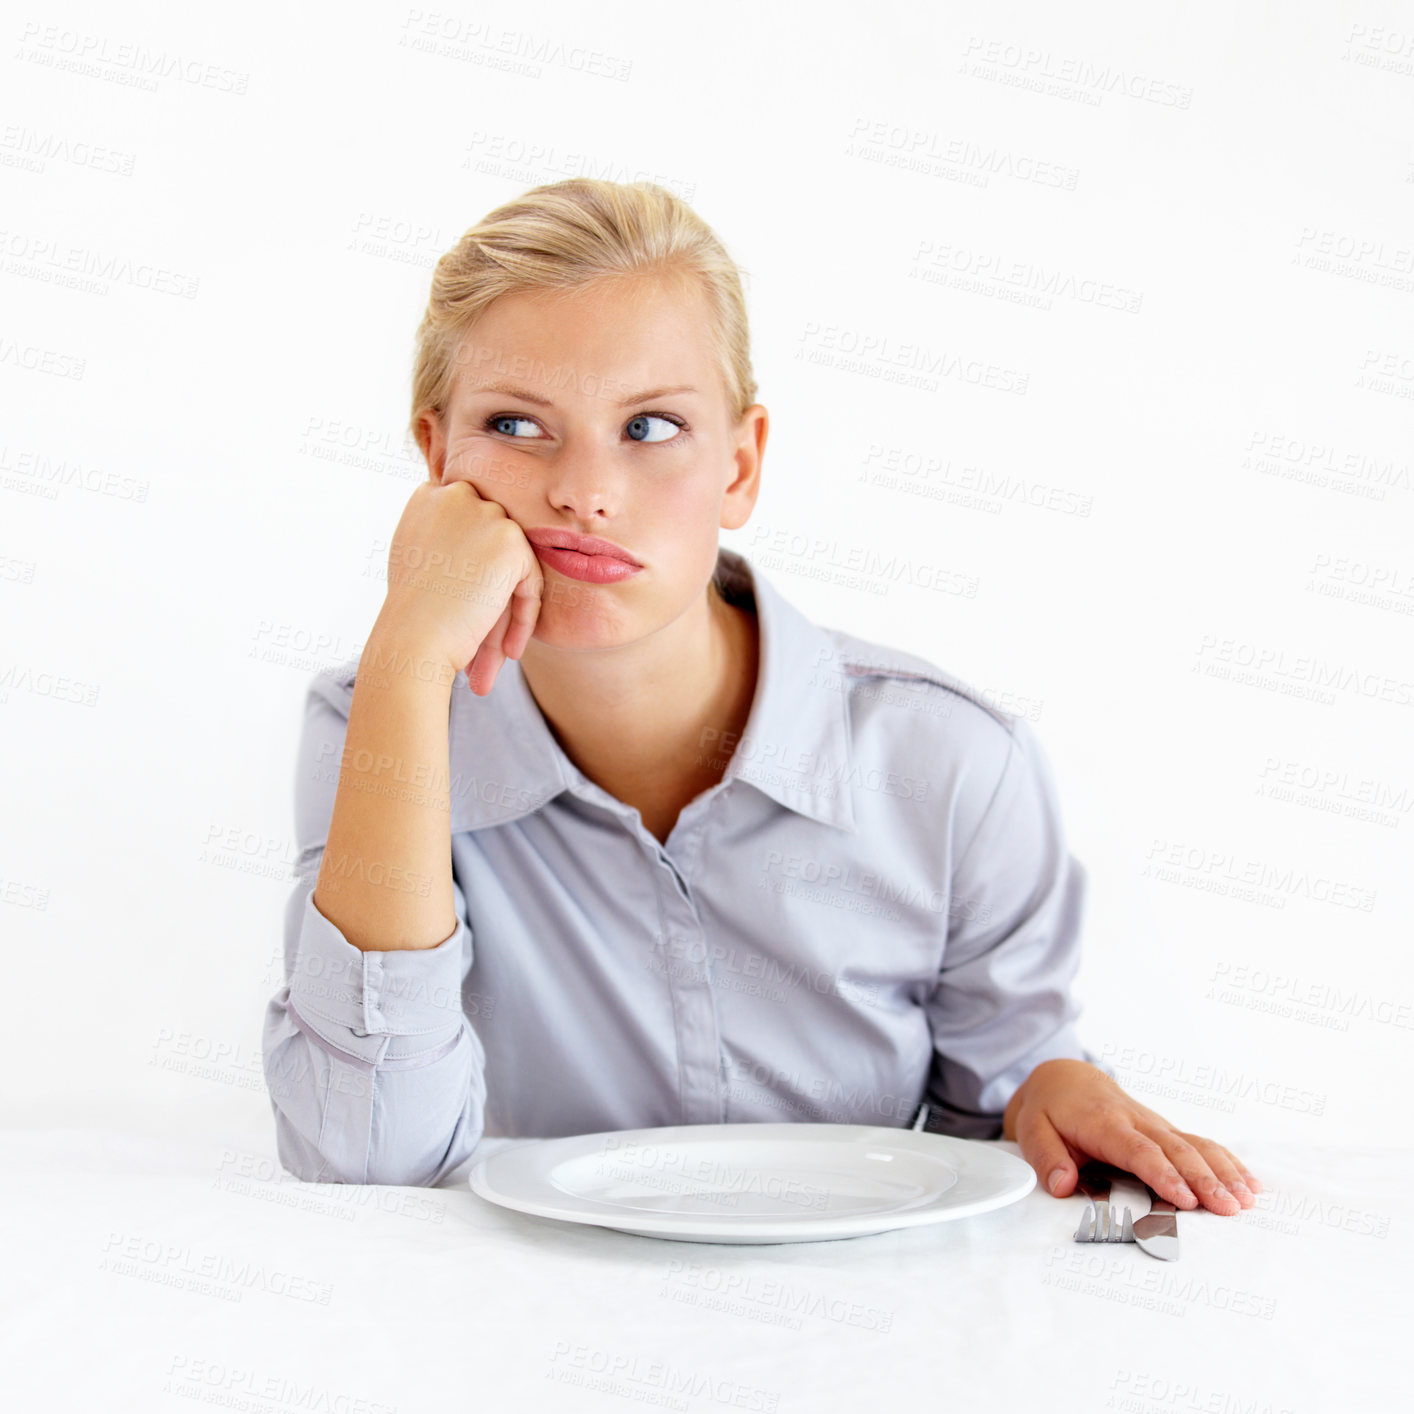 Buy stock photo Bored young woman sitting in front of an empty plate looking pissed off